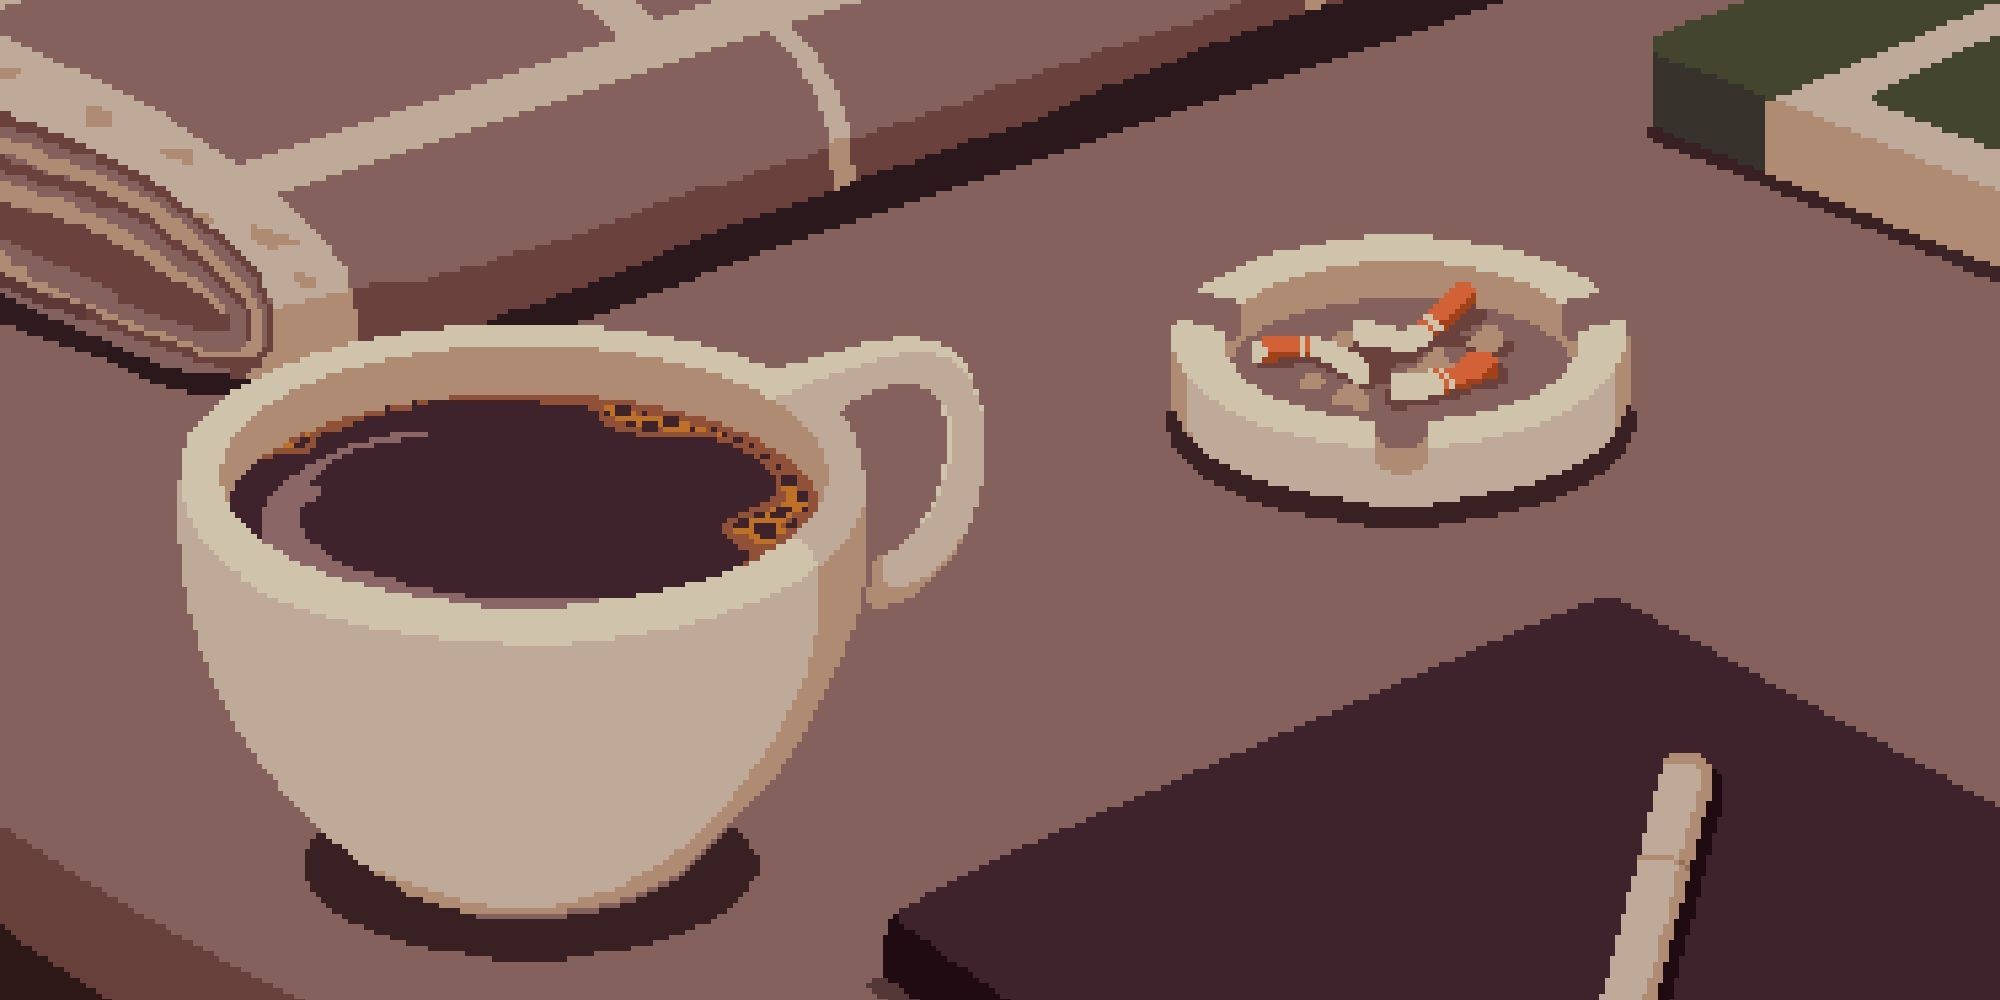 A background image from the barista simulator Coffee Talk, depicting a mug of coffee and an ashtray.